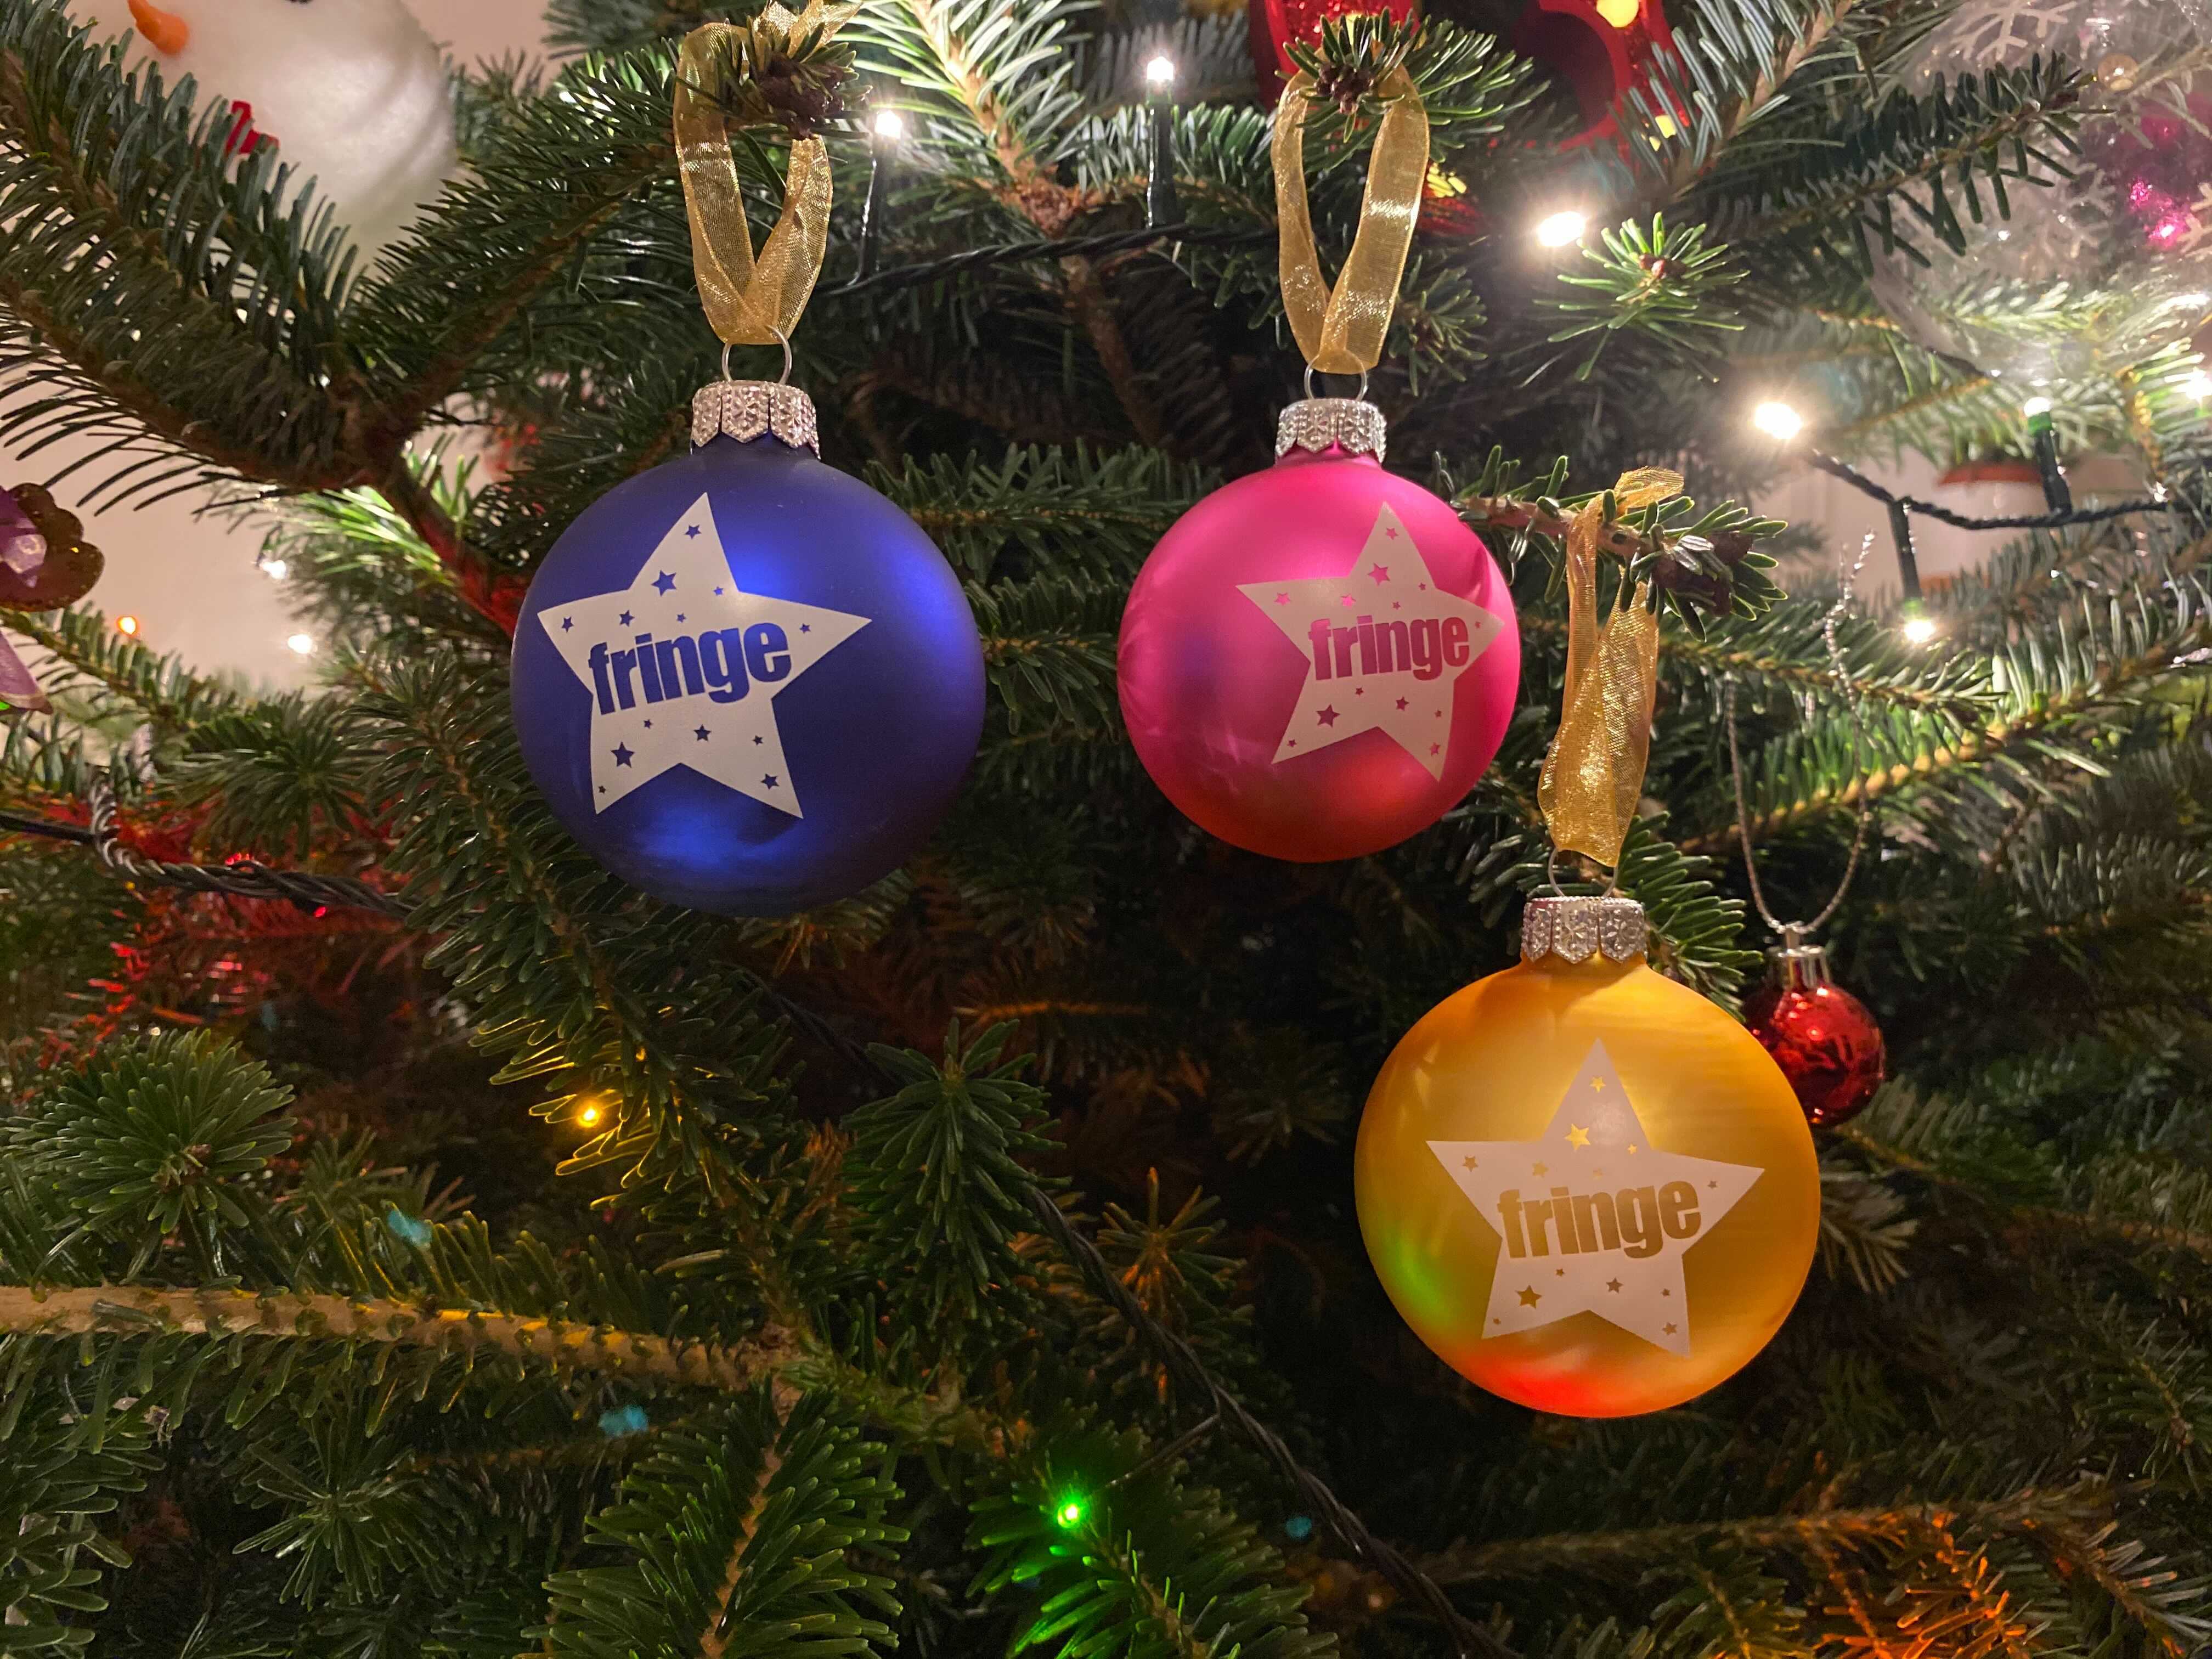 Fringemas baubles hanging on a Christmas tree.